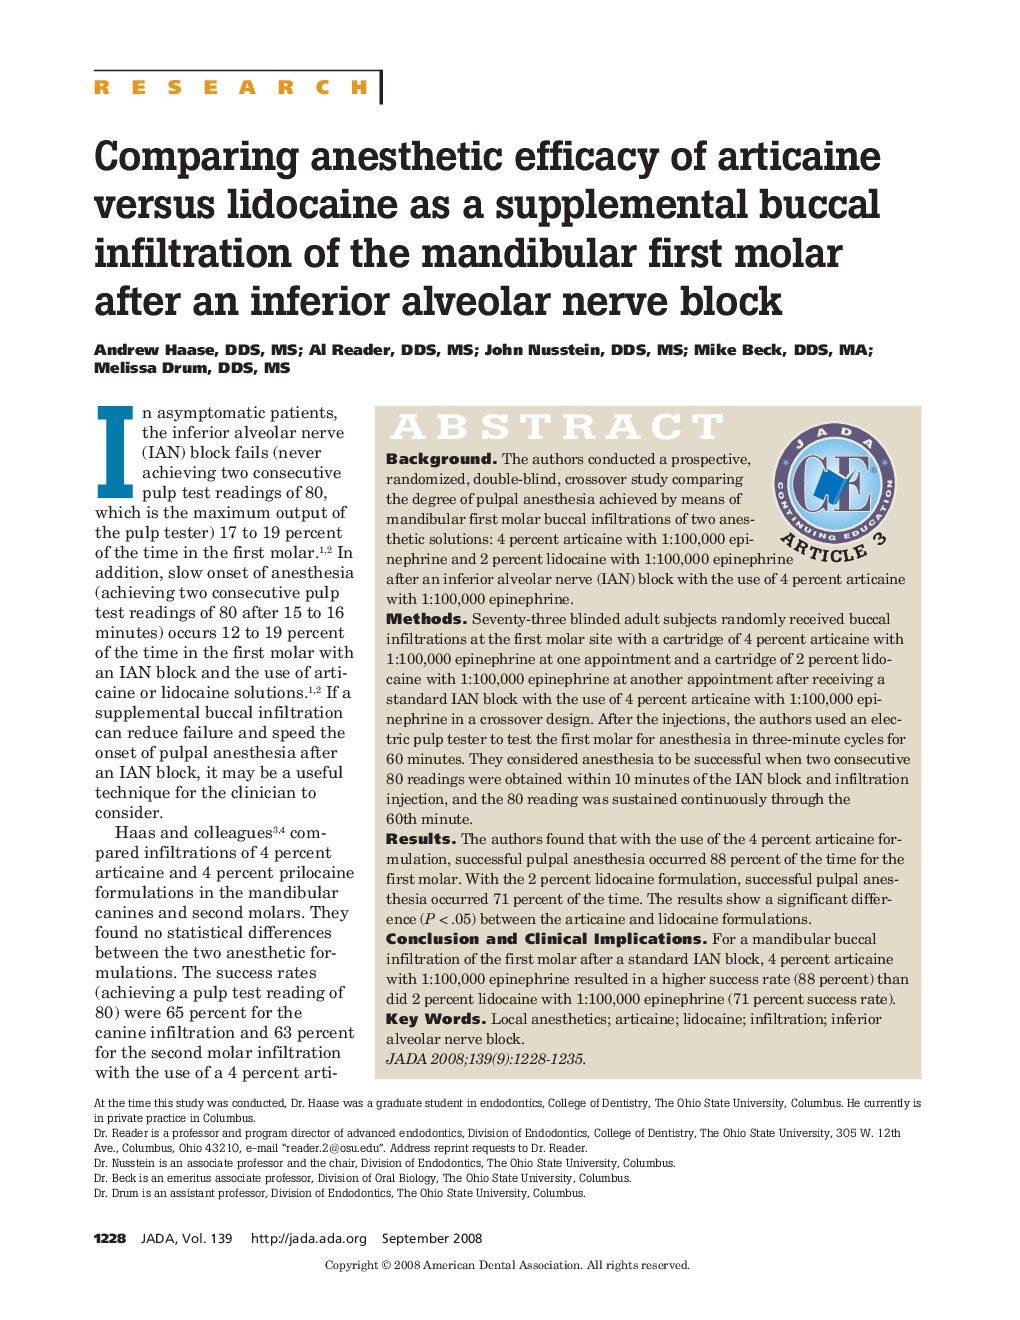 Comparing Anesthetic Efficacy of Articaine Versus Lidocaine as a Supplemental Buccal Infiltration of the Mandibular First Molar After an Inferior Alveolar Nerve Block 